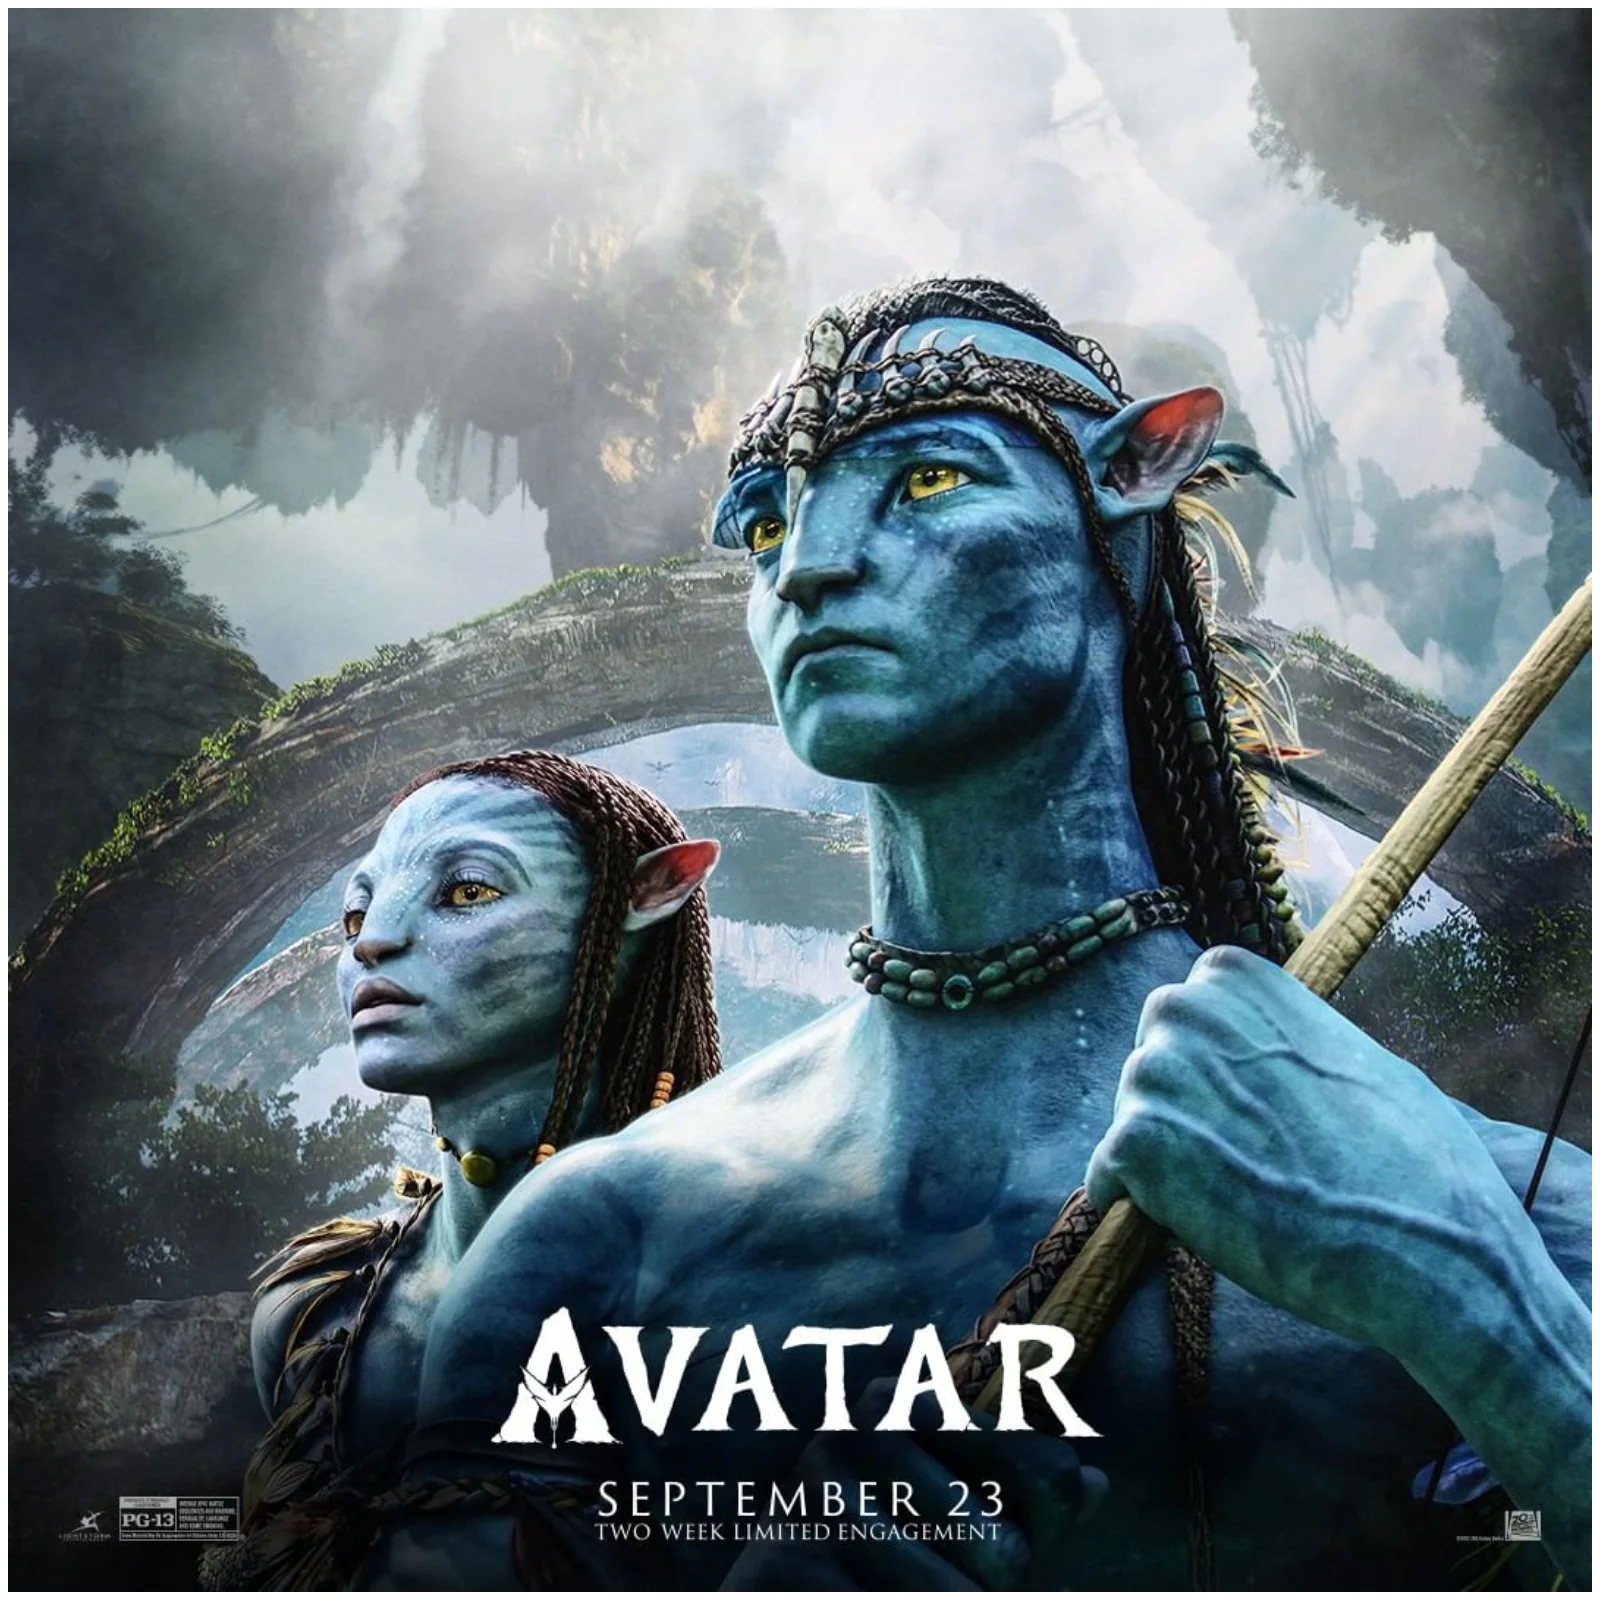 Avatar 2 160 Languages List Avatar 2 In How Many Languages